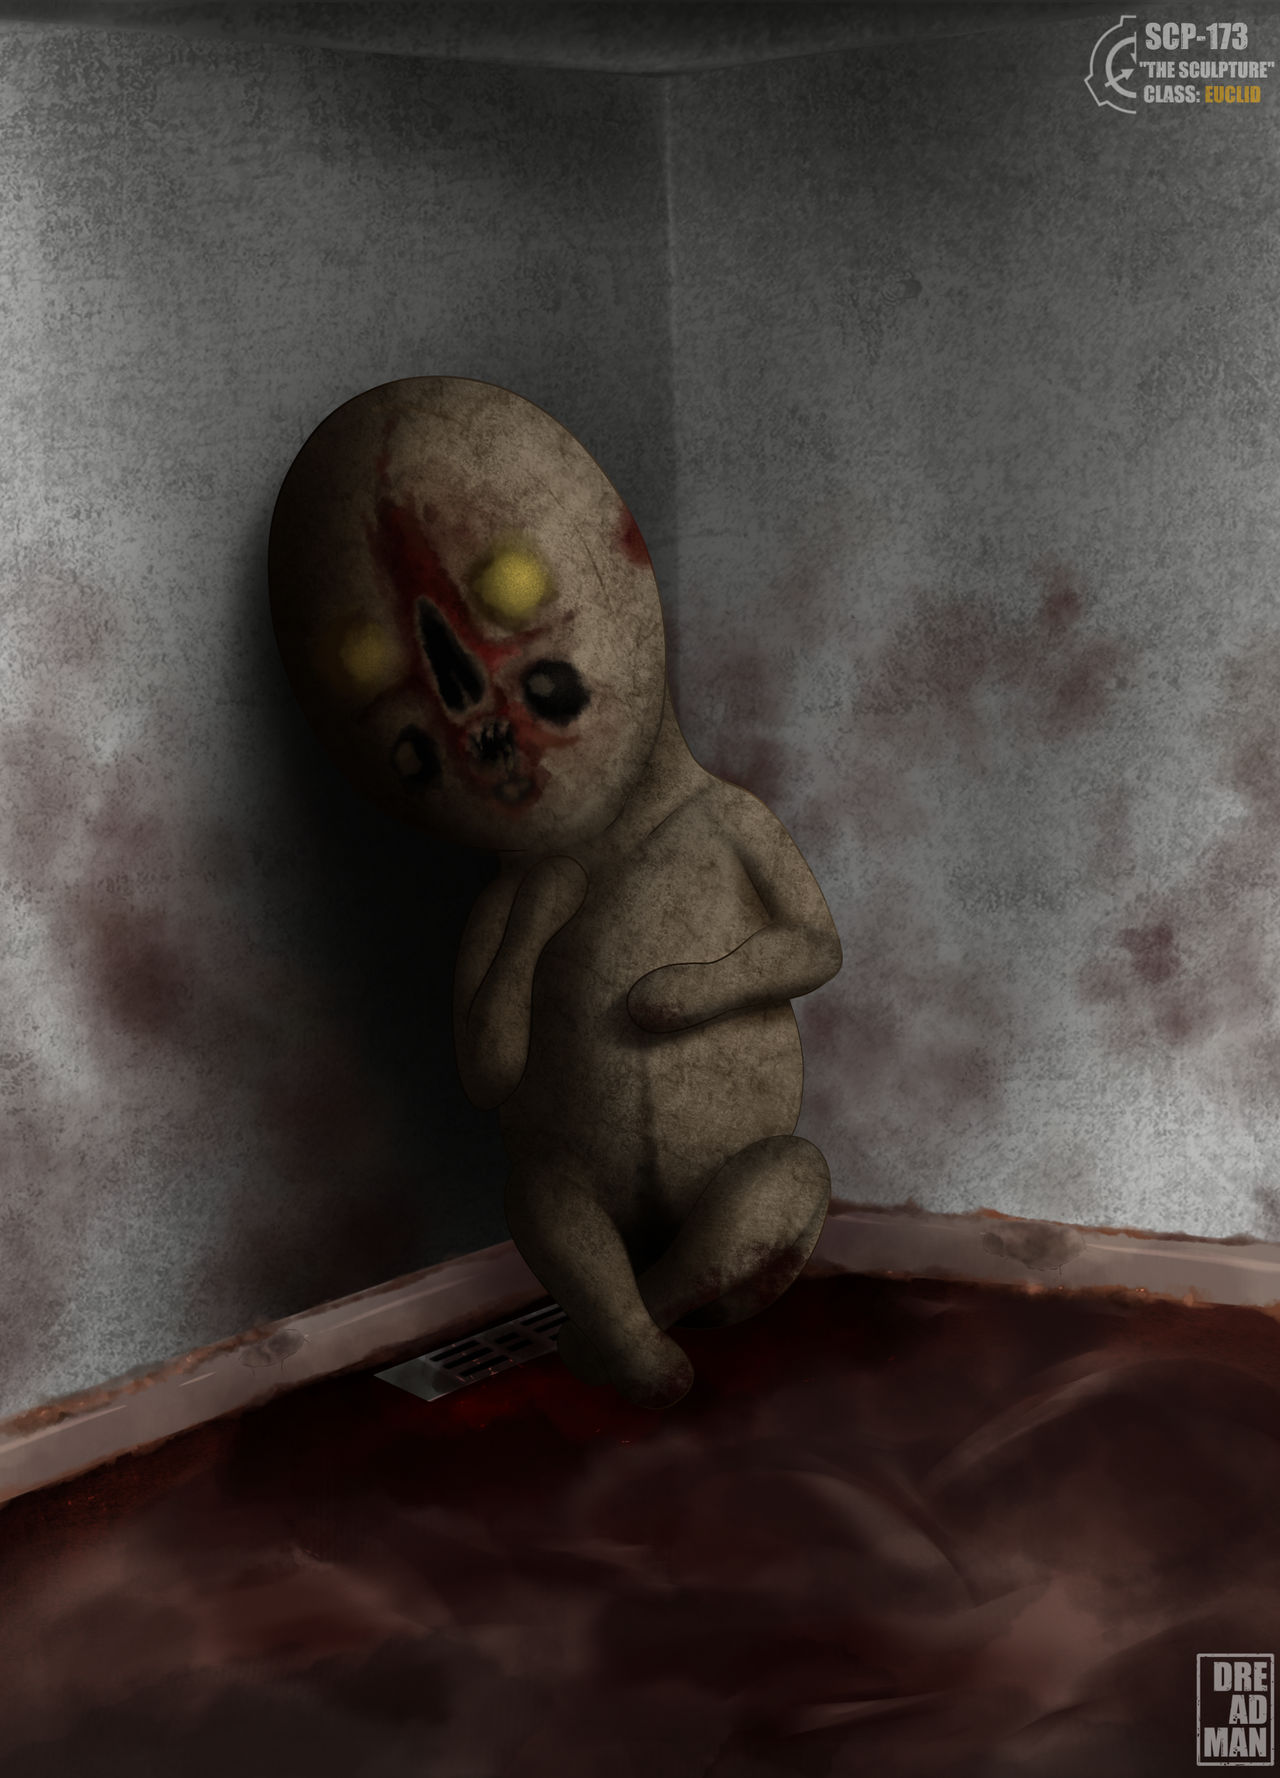 SCP-173 The Sculpture by JohnDraw54 on DeviantArt